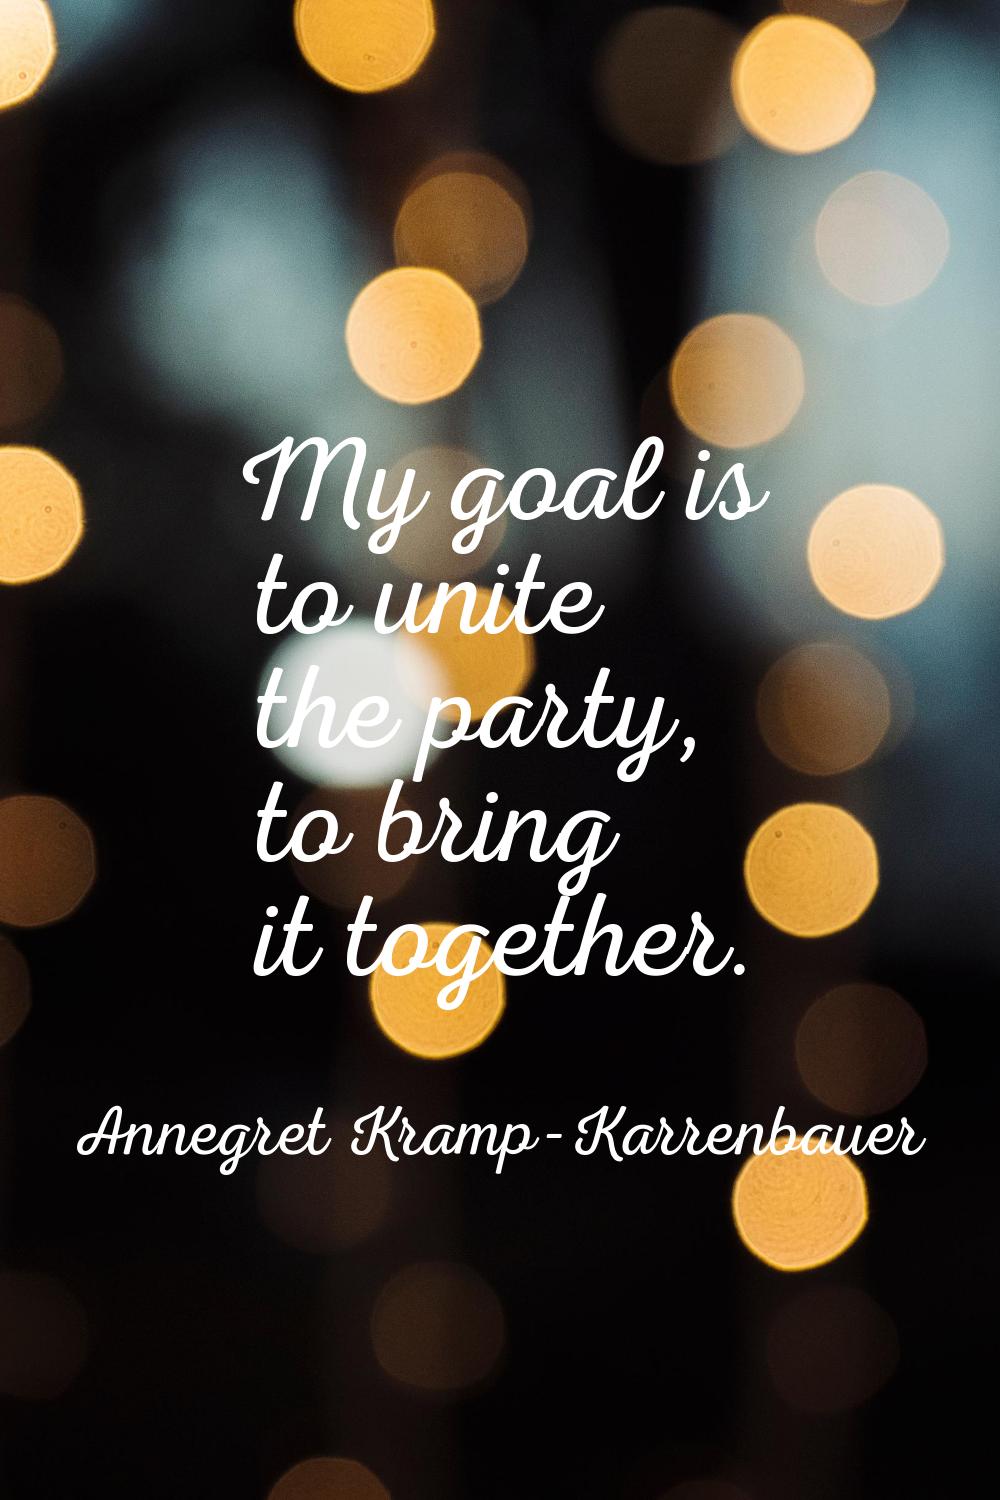 My goal is to unite the party, to bring it together.